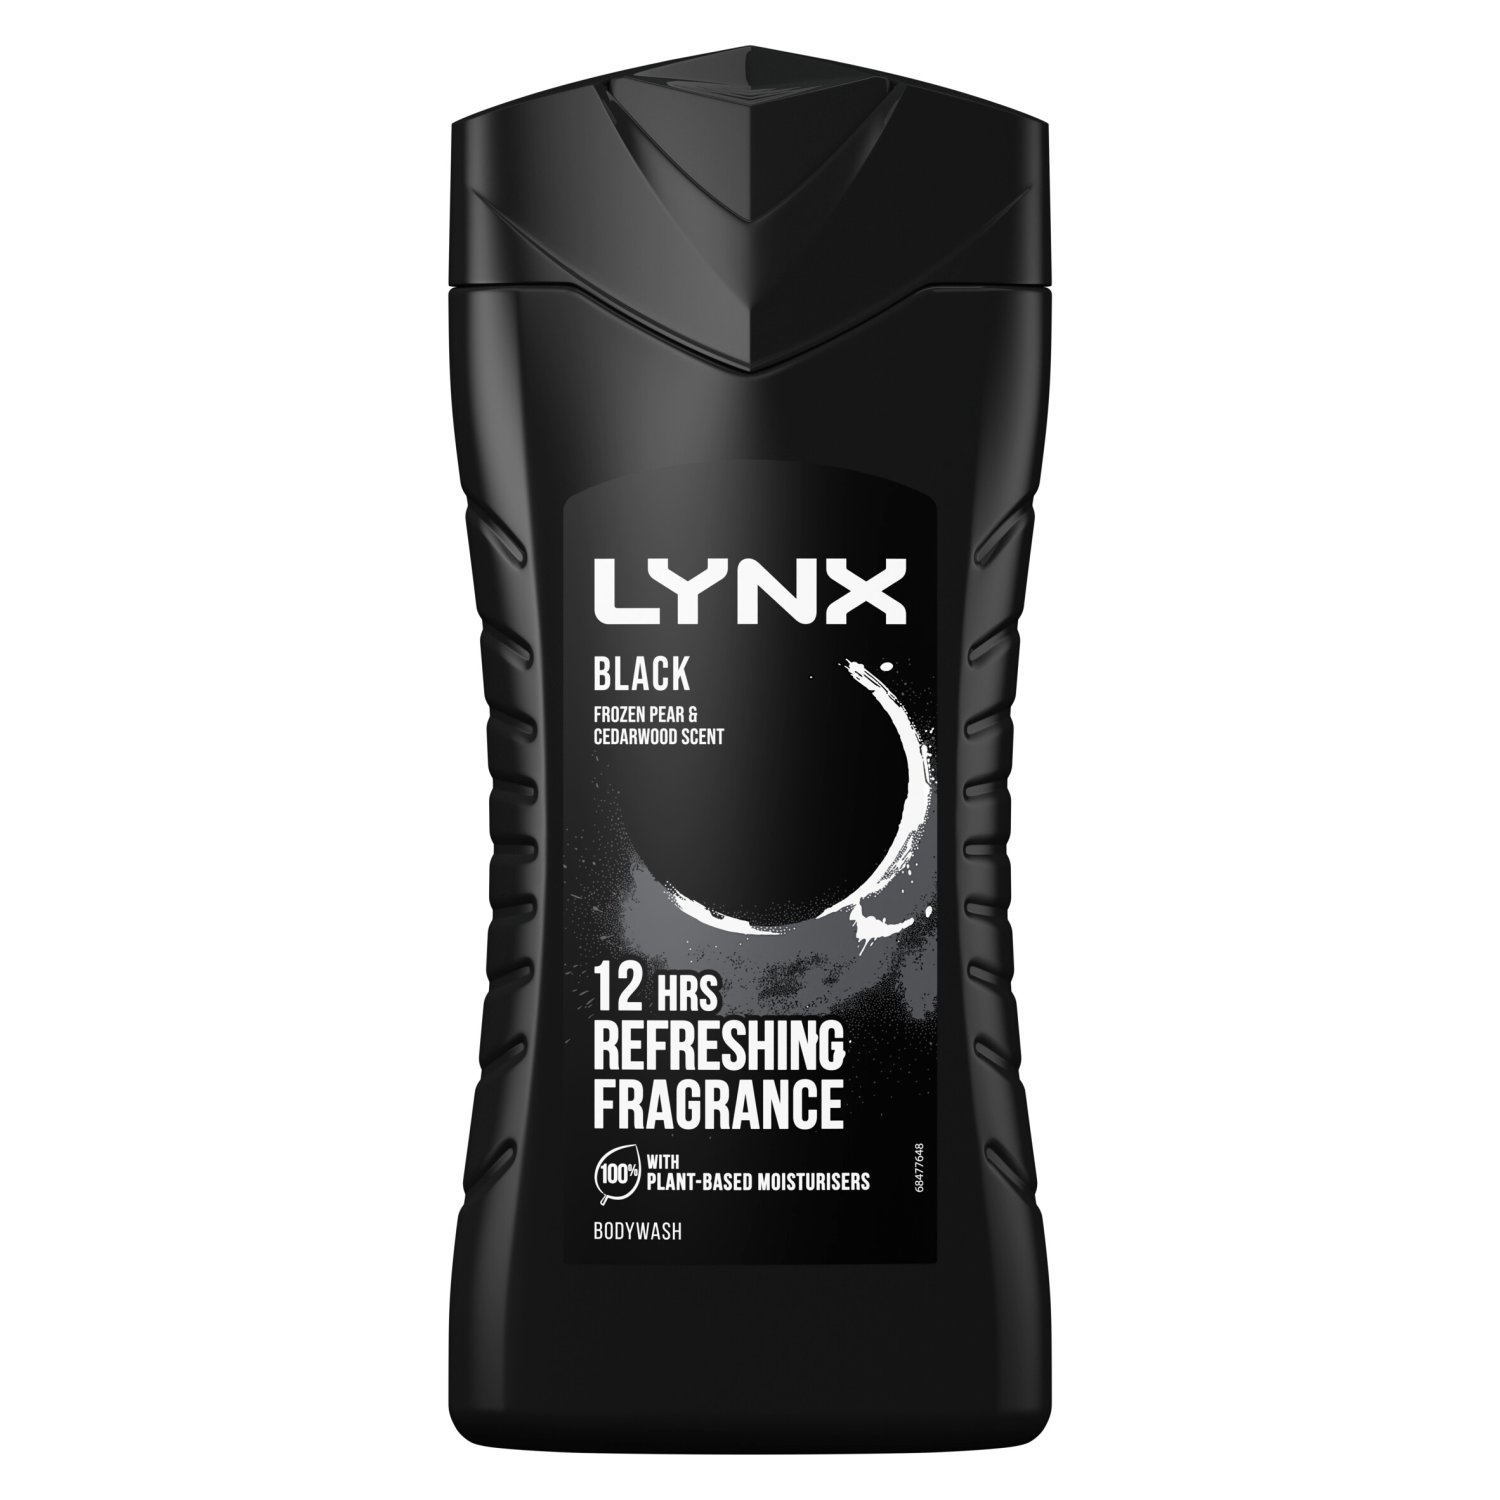 You never know when opportunity will strike – so you need to smell your best all day. With a 12-hour refreshing scent, Lynx Black Body Wash washes away odour and keeps you smelling shower-fresh. All. Day. Long. Refreshing, effortless and deliciously foamy, this body cleanser of frozen pear & cedarwood, leaves you clean, fresh and smelling 100% iconic.What’s more, our 100% plant-based moisturisers keep your skin feeling irresistibly soft, naturally. All day, all night – no matter what, you’re ready. You decide how to play your 12 hours of freshness. At LYNX, we believe that a great day starts with a great shower. By 2025, we aim for all our packaging to be recyclable or to include recycled materials – our bodywash bottles are already made of 100% recycled plastic*. Fresher you, cleaner planet. Welcome to the future. It smells amazing. LYNX. *excluding cap. What’s more, our 100% plant-based moisturisers keep your skin feeling irresistibly soft, naturally. All day, all night – no matter what, you’re ready. You decide how to play your 12 hours of freshness. At LYNX, we believe that a great day starts with a great shower.